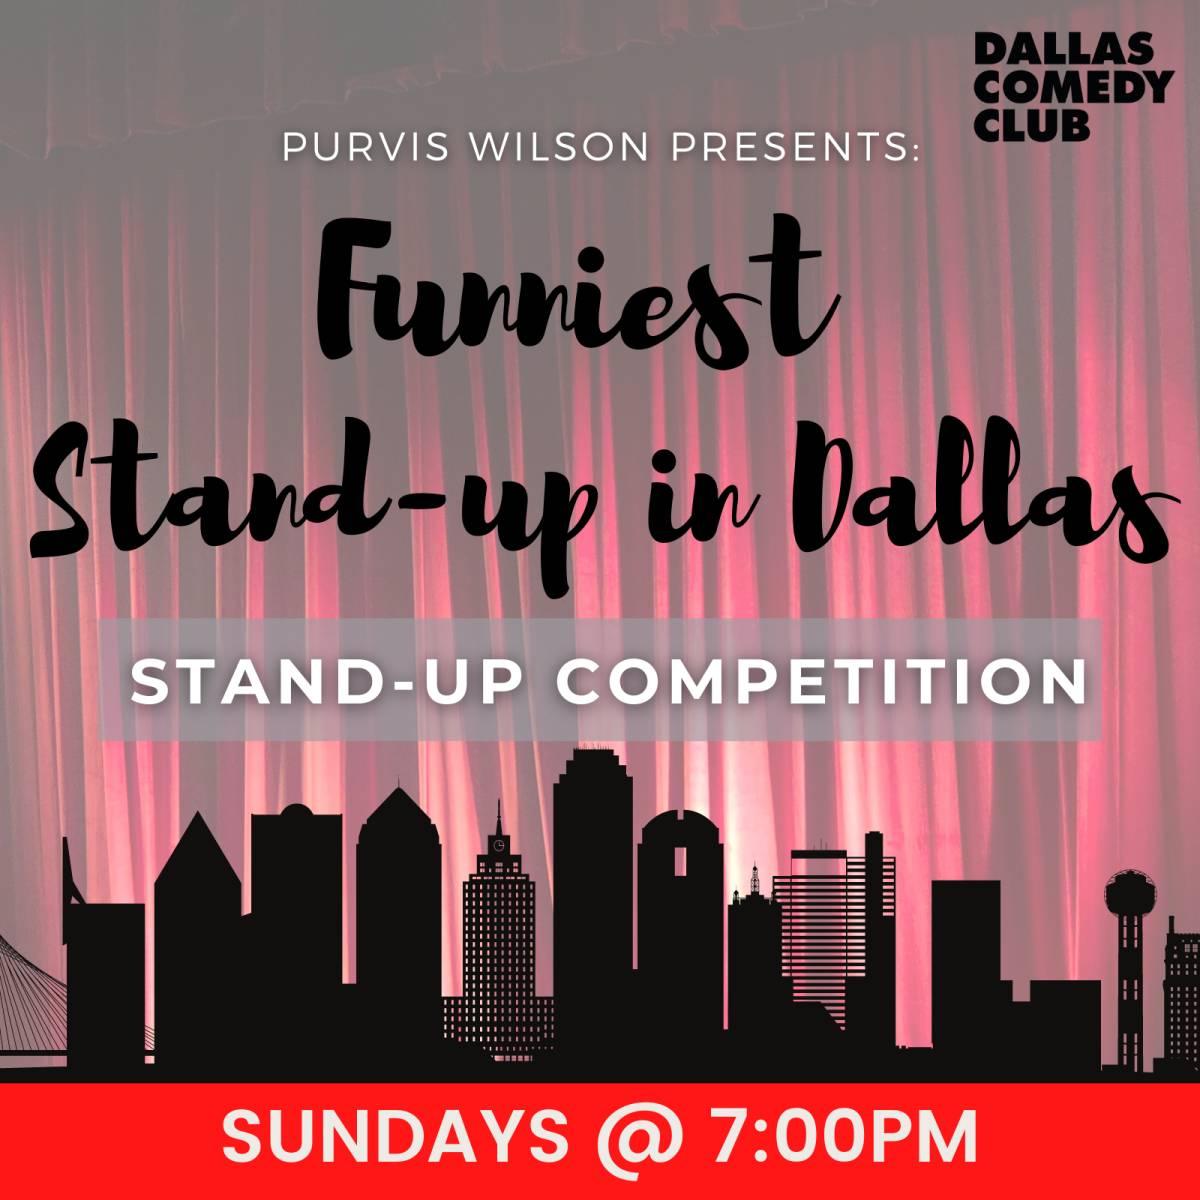 Purvis Wilson Presents: The Funniest Stand-up in Dallas Competition - Wildcard